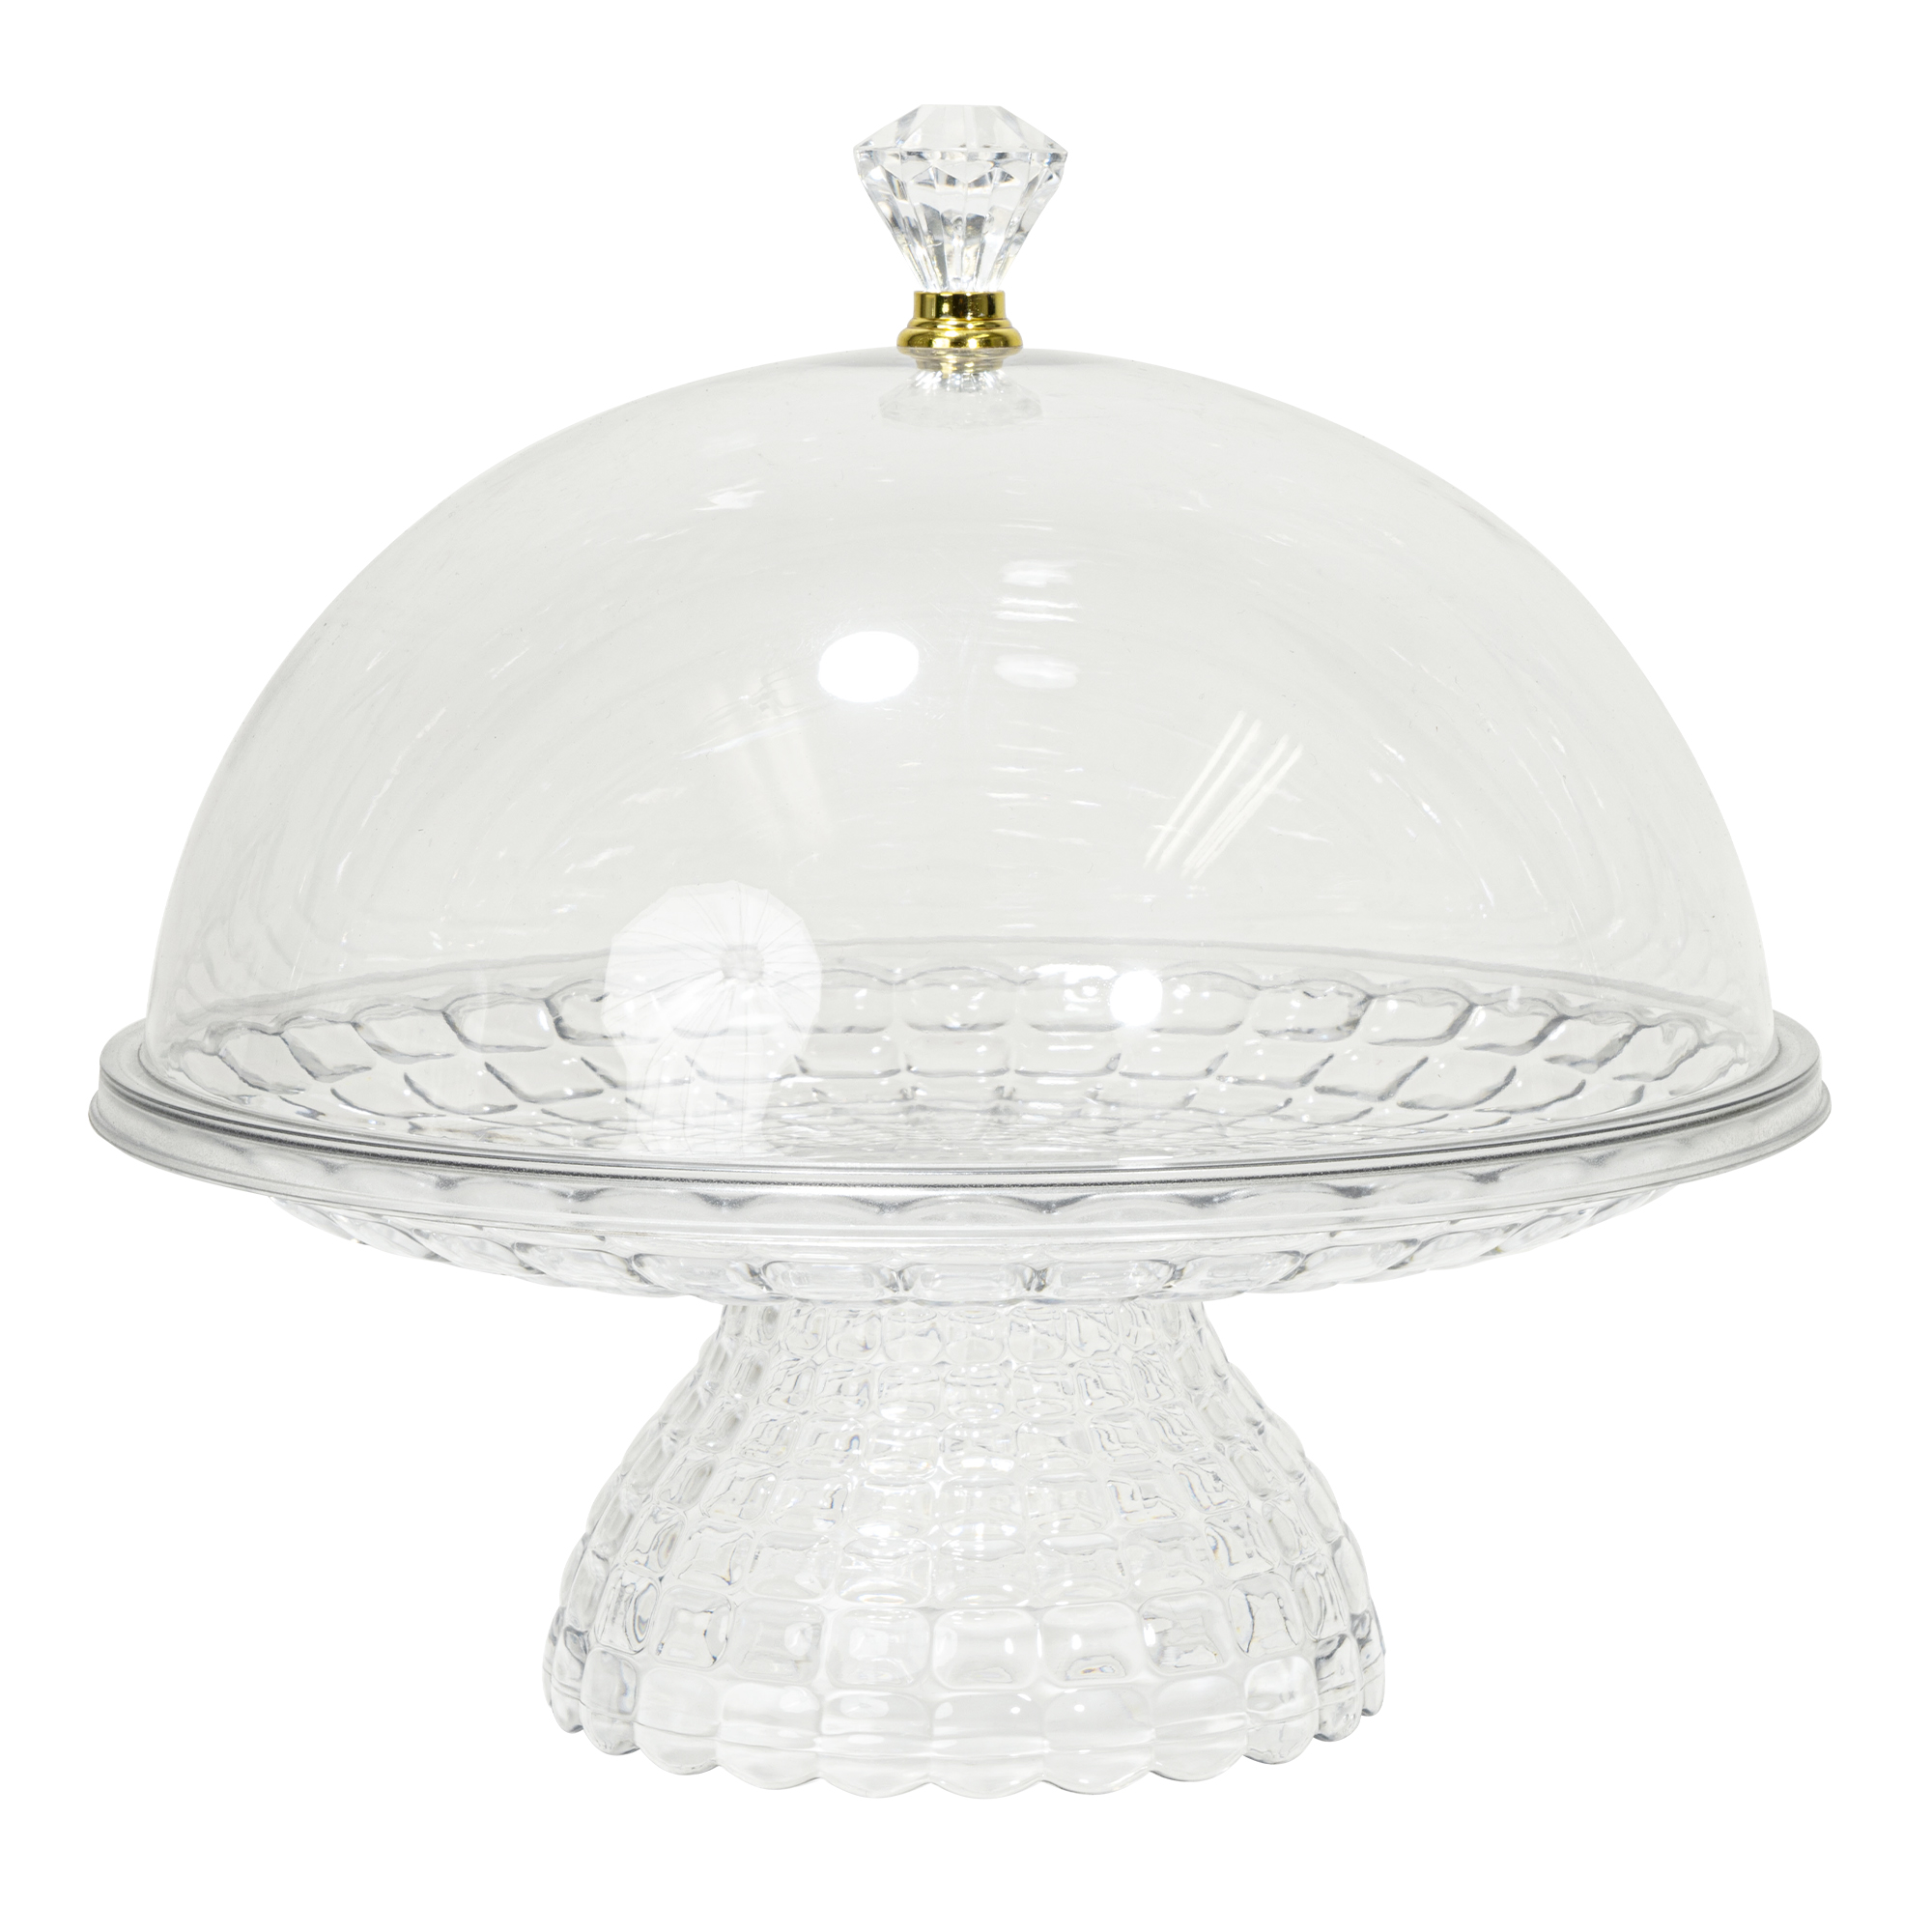 Plastic Cake Stand With Dome Lid 9½" - Clear